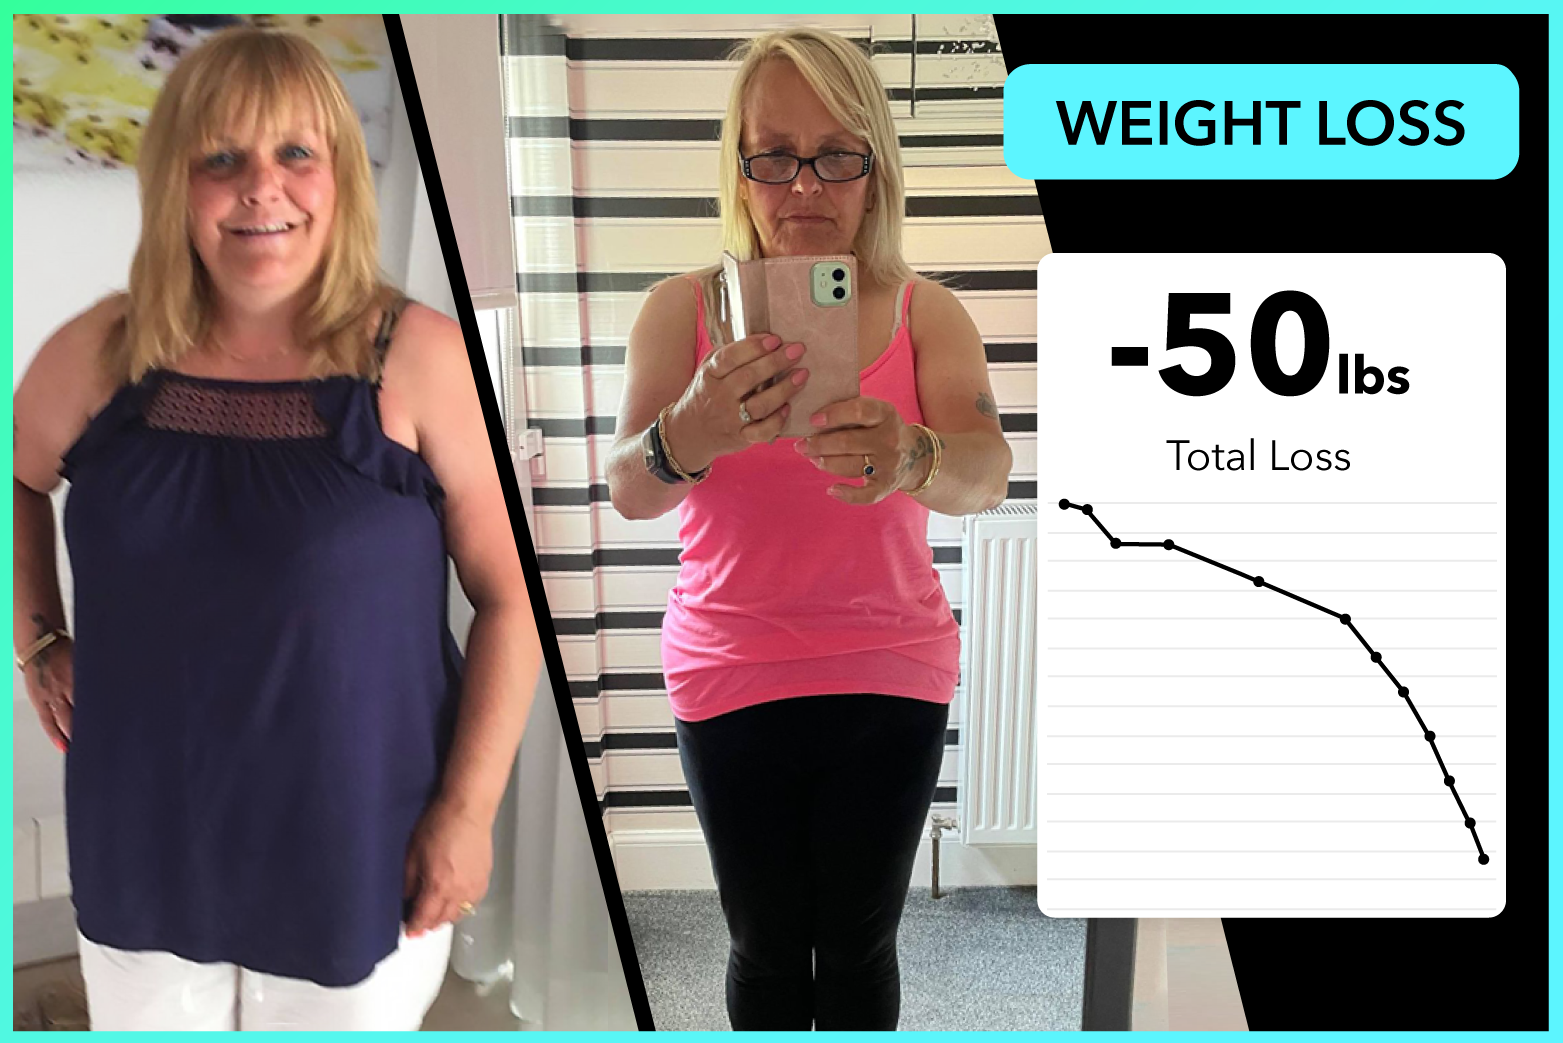 Debbie has lost 50lbs with Team RH